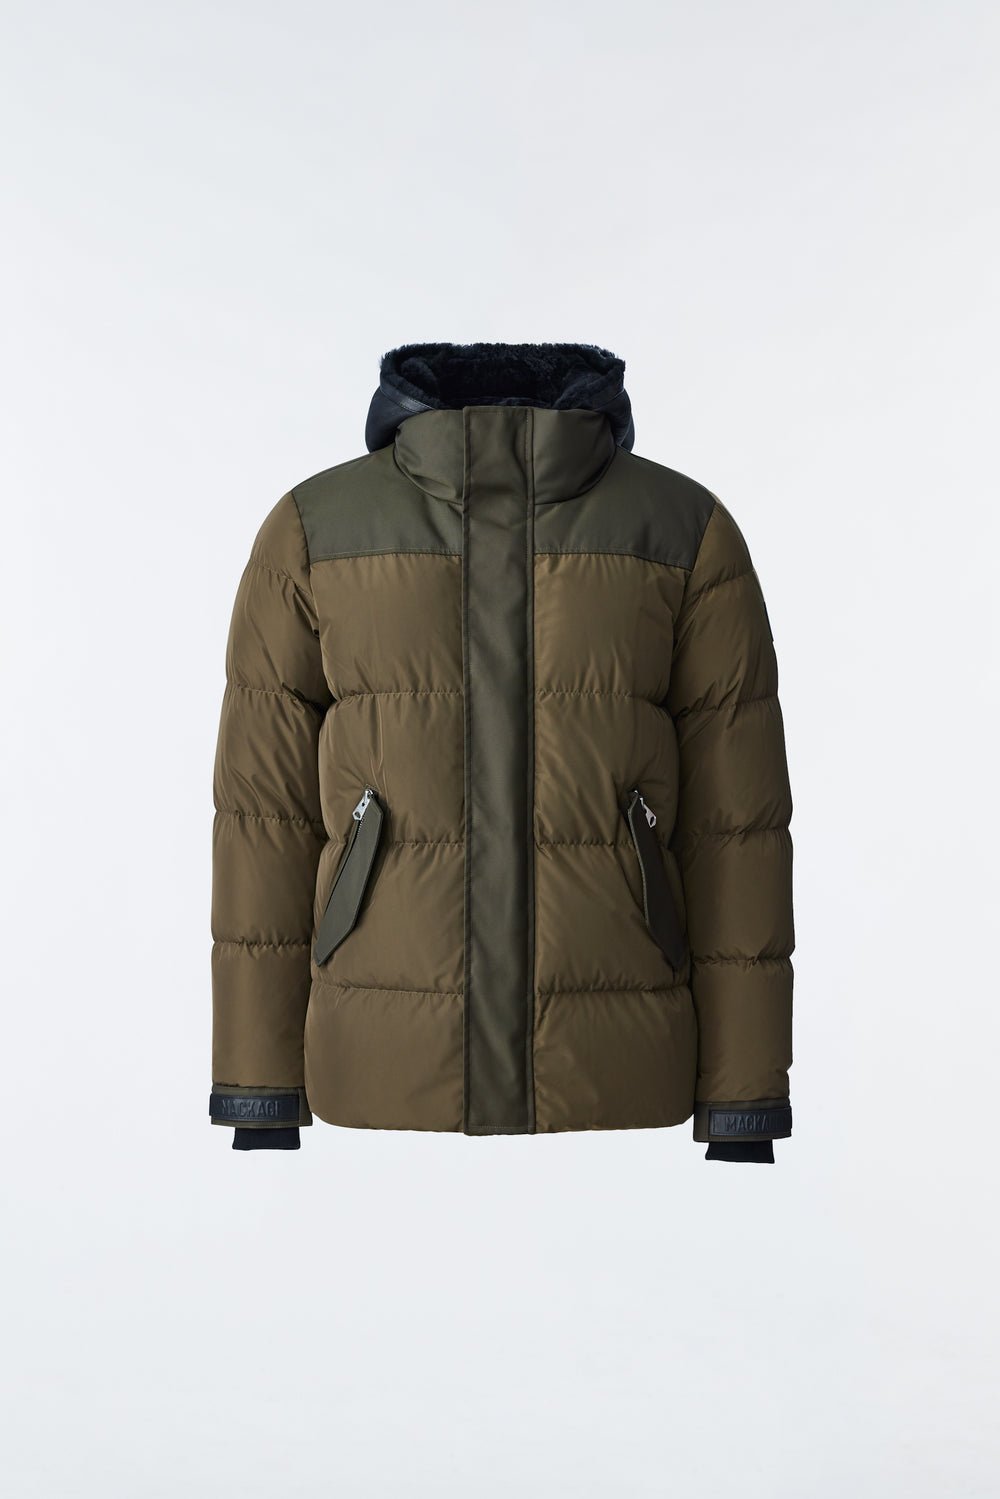 MACKAGE RILEY - classic down jacket with removable shearling bib - VENTE FINALE - Boutique Bubbles